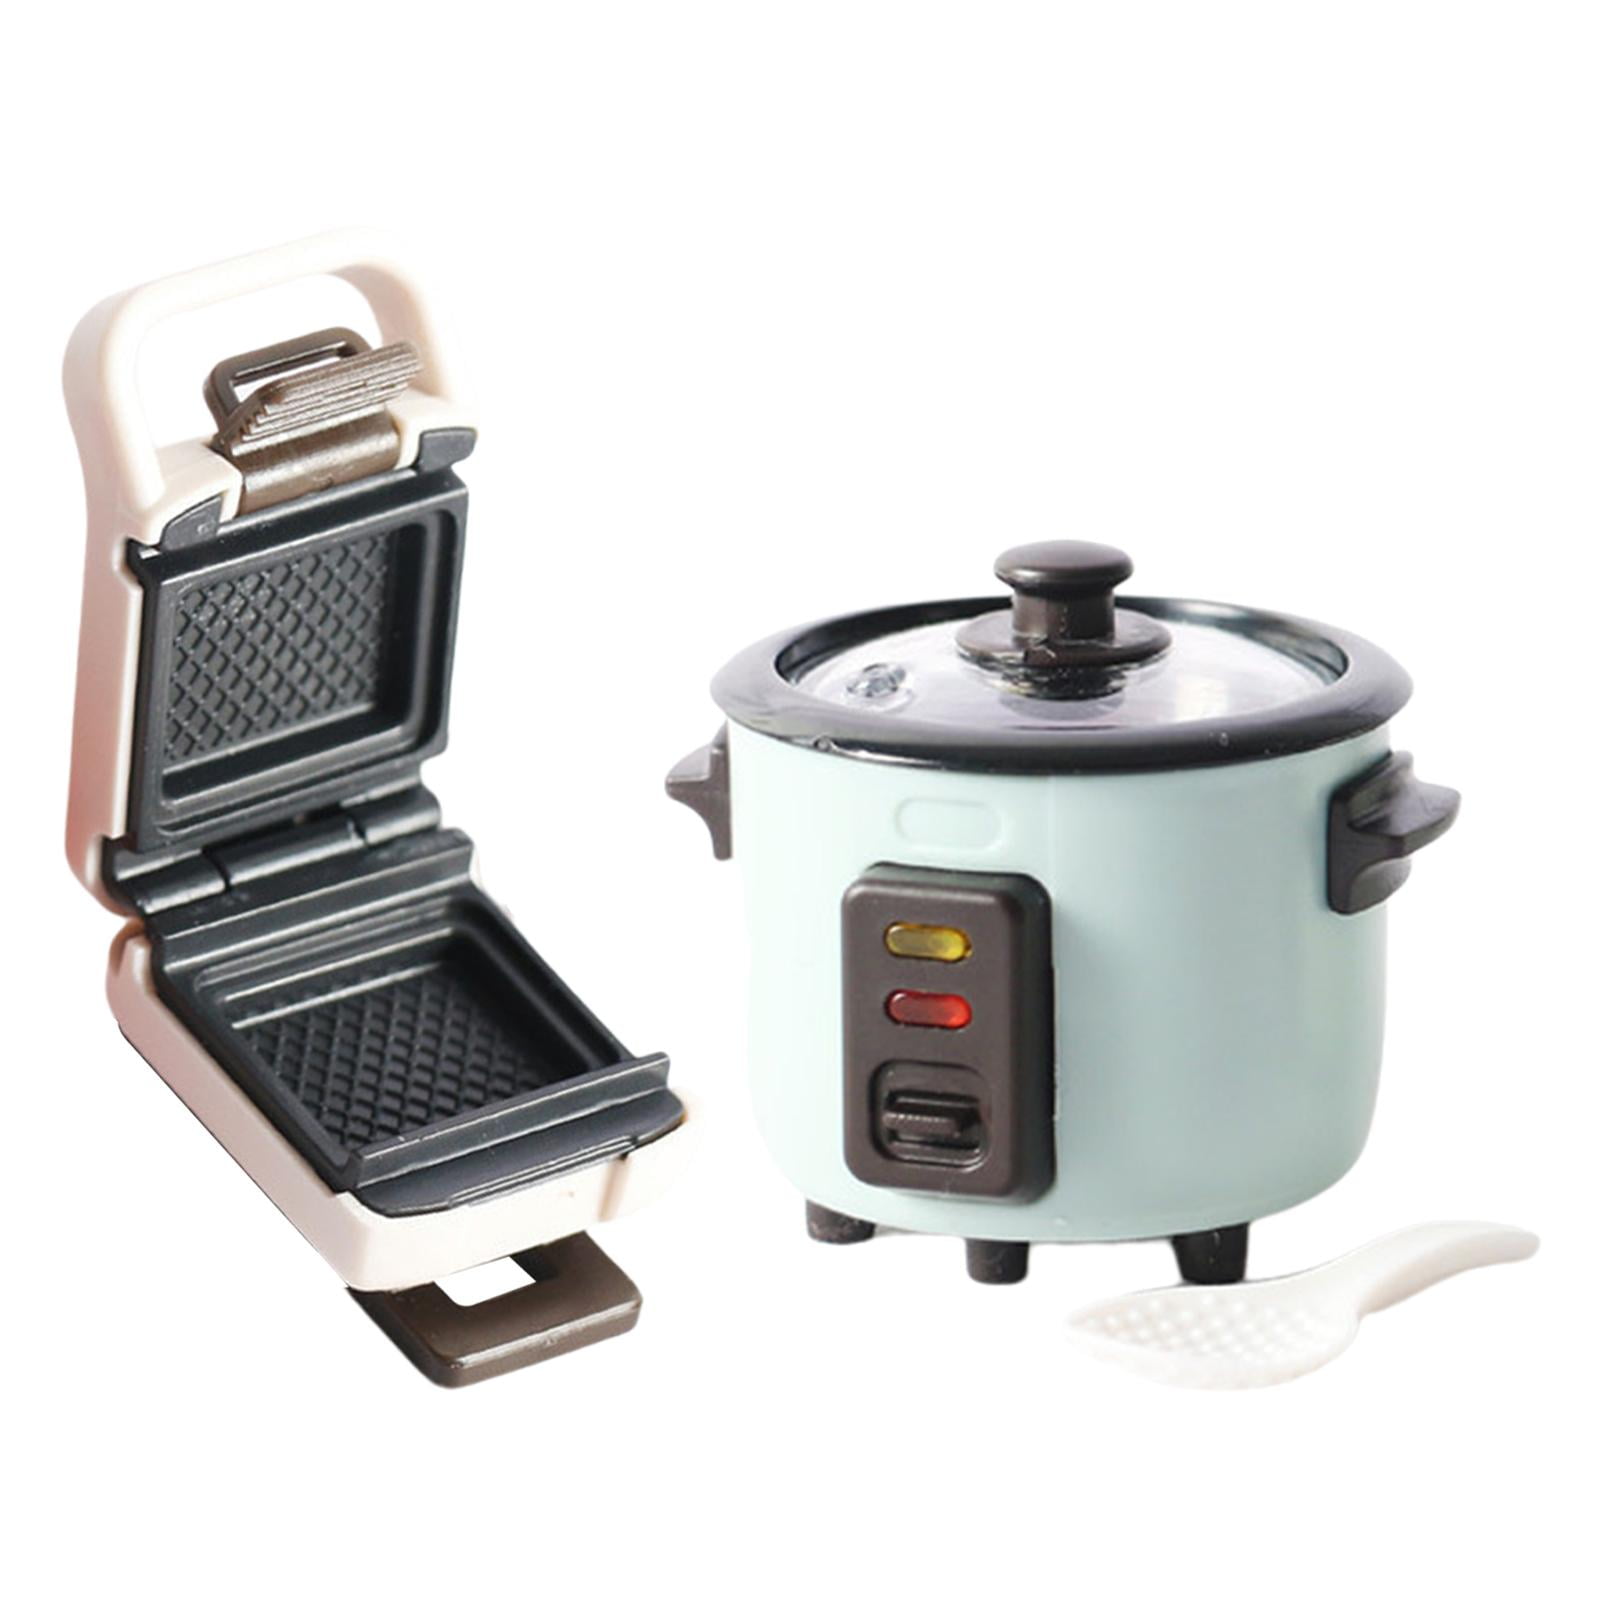 2 Pack Breakfast Machine and Rice Cooker Scene Supplies Ornaments